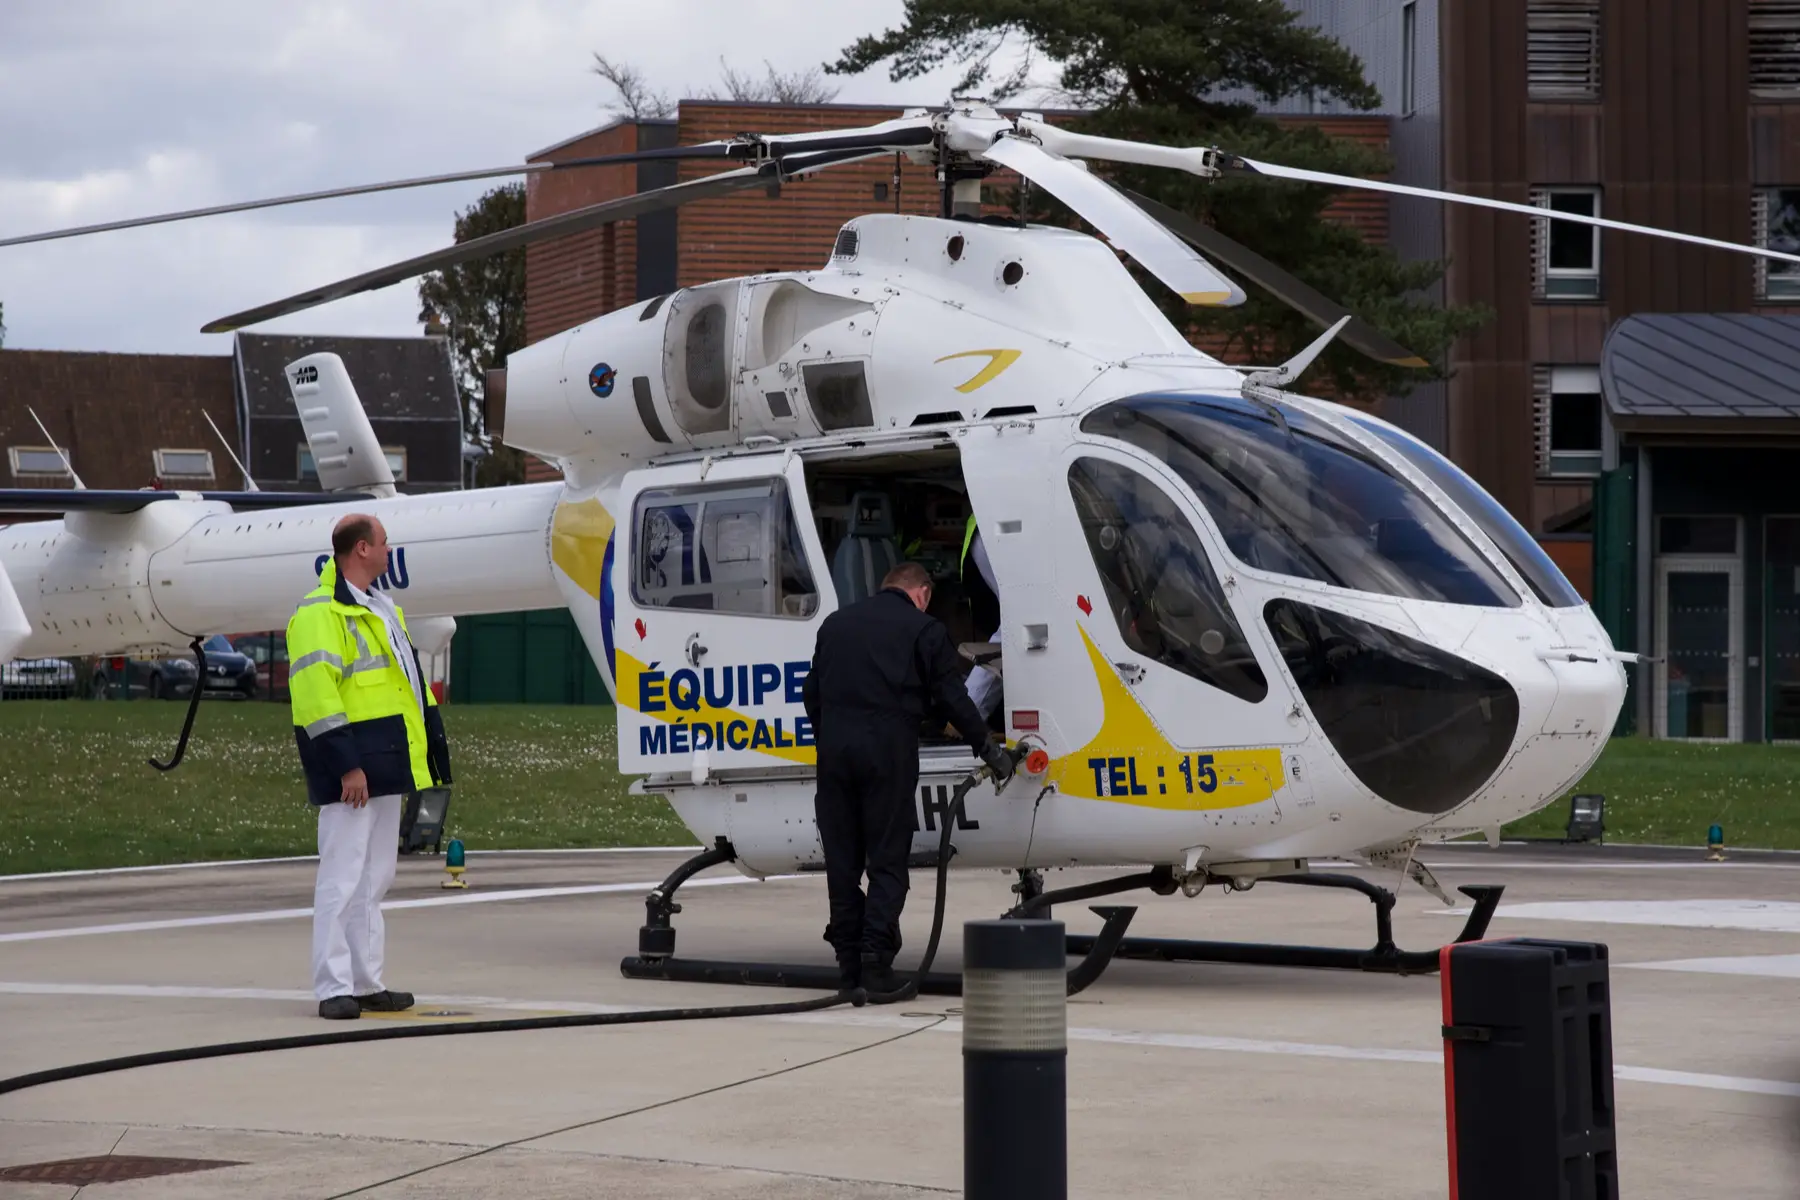 air ambulance based at Arras Hospital in northern France